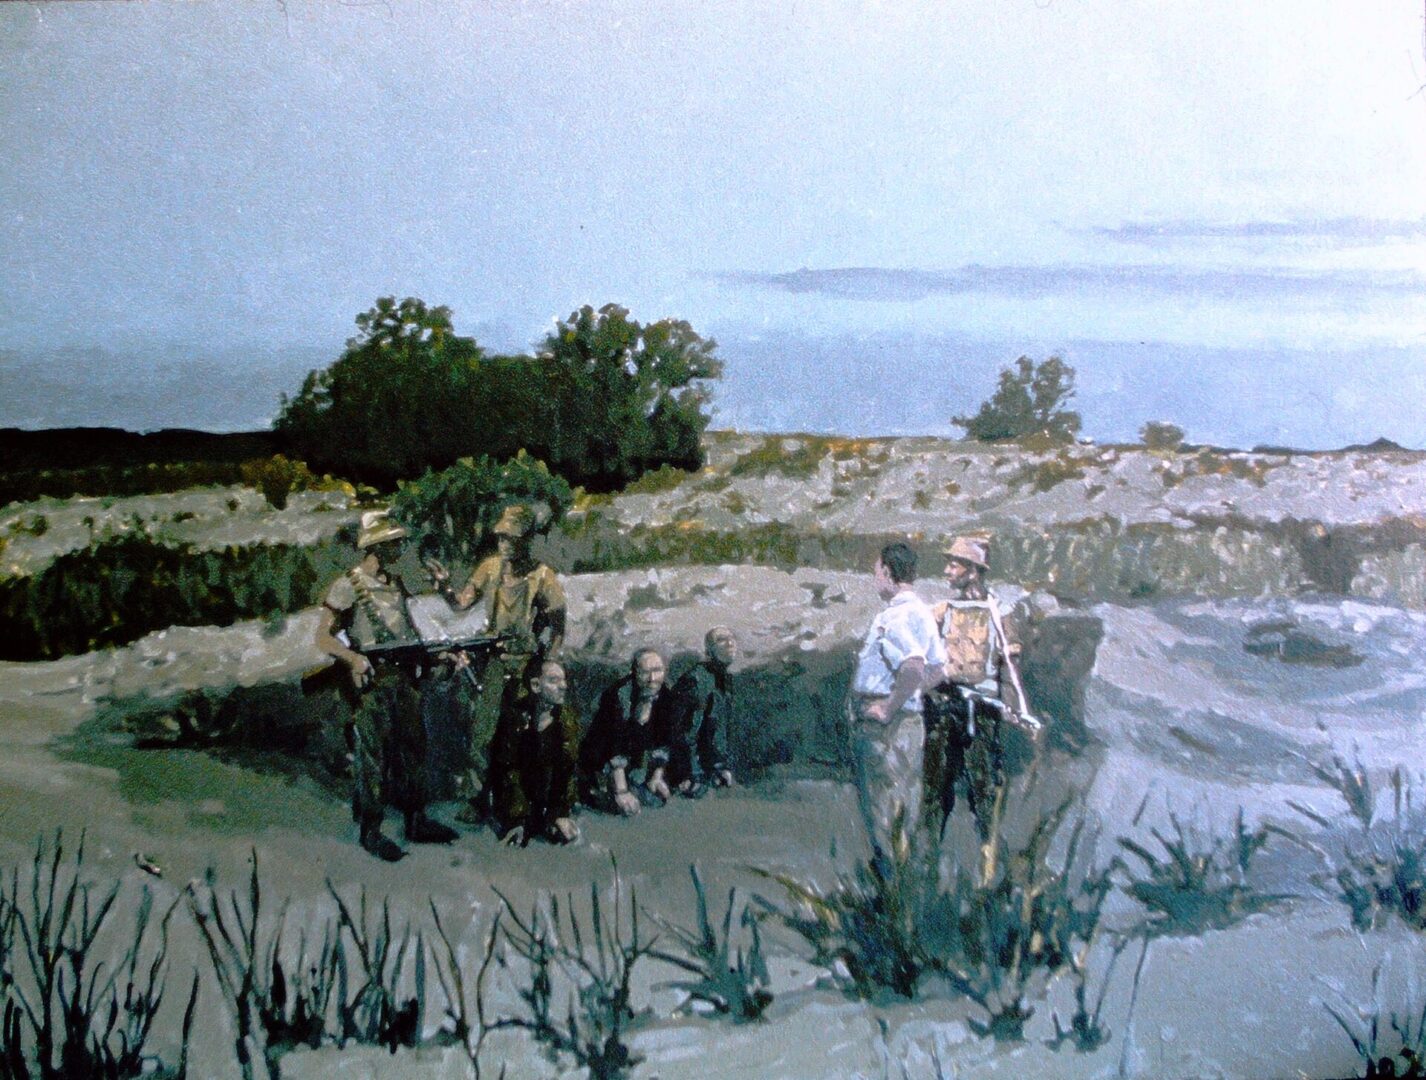 DEFENDING OF THE CRuMBLING RAMPARTS<br>
1985<br>
36" x 48"
